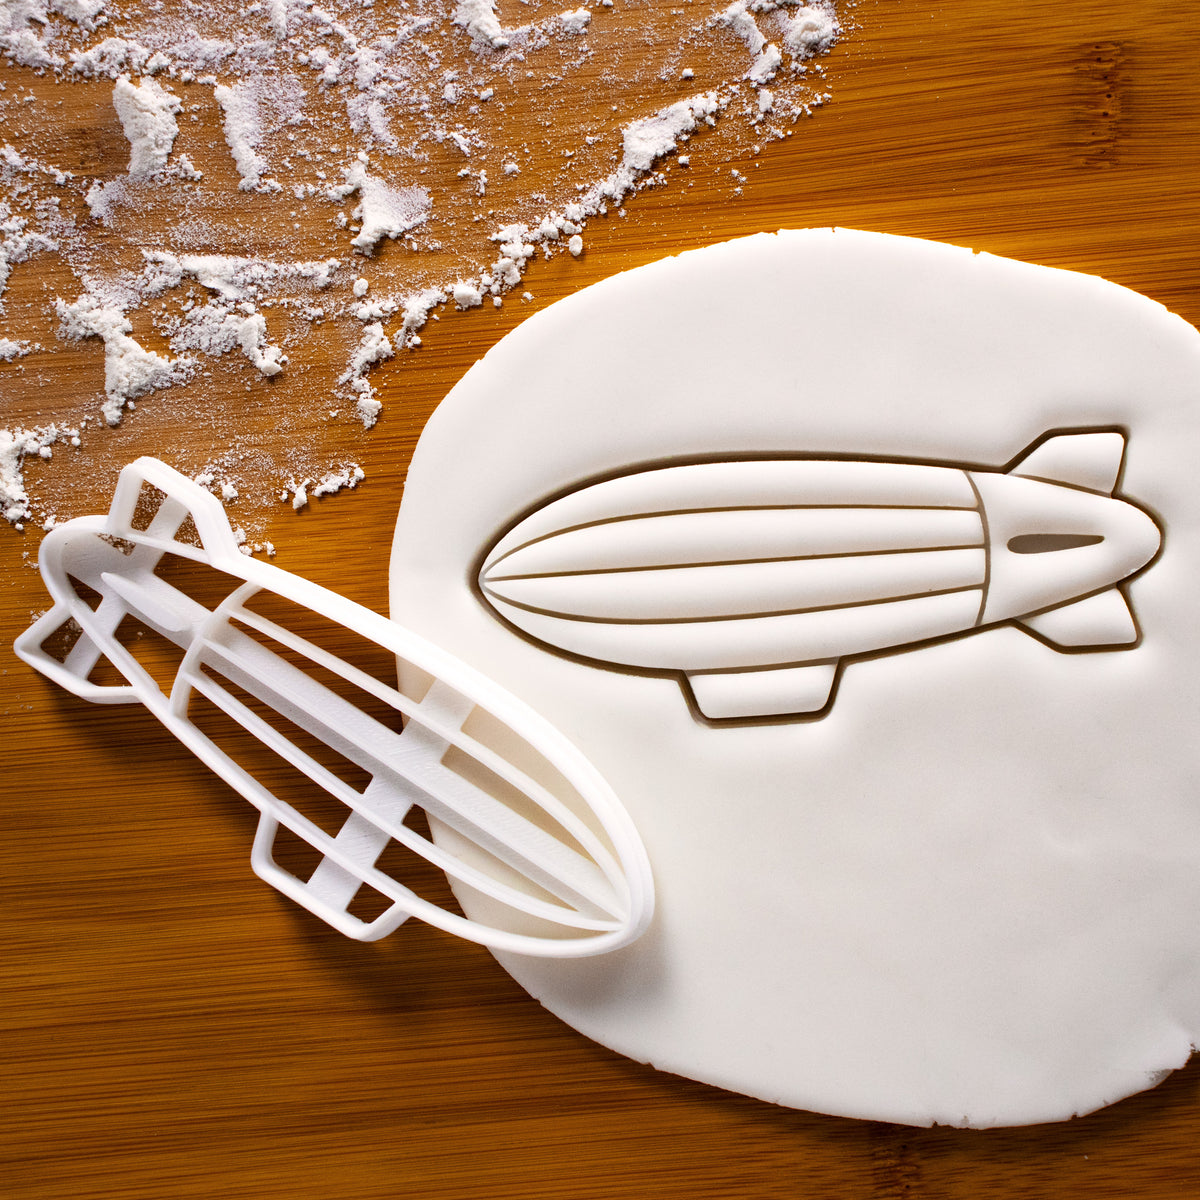 Blimp cookie cutter pressed on fondant